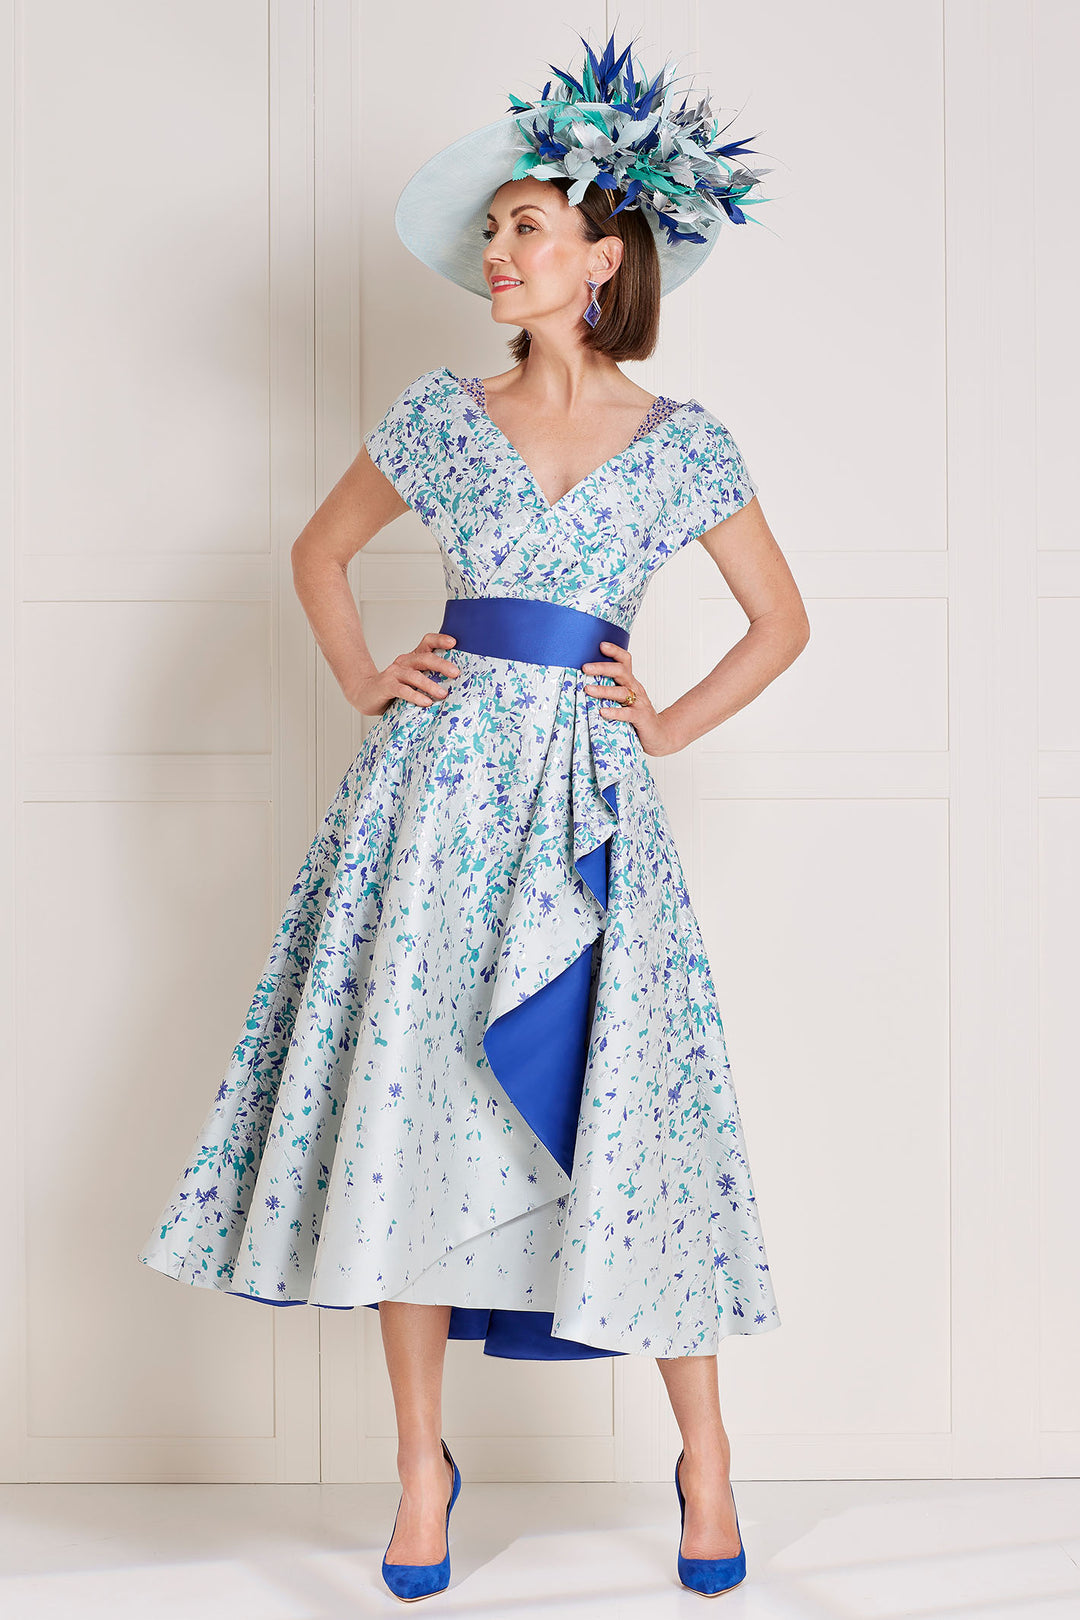 John Charles 29125 A Line Dress with Bardot Neckline in Ocean Jacquard Print - Rouge Boutique Inverness